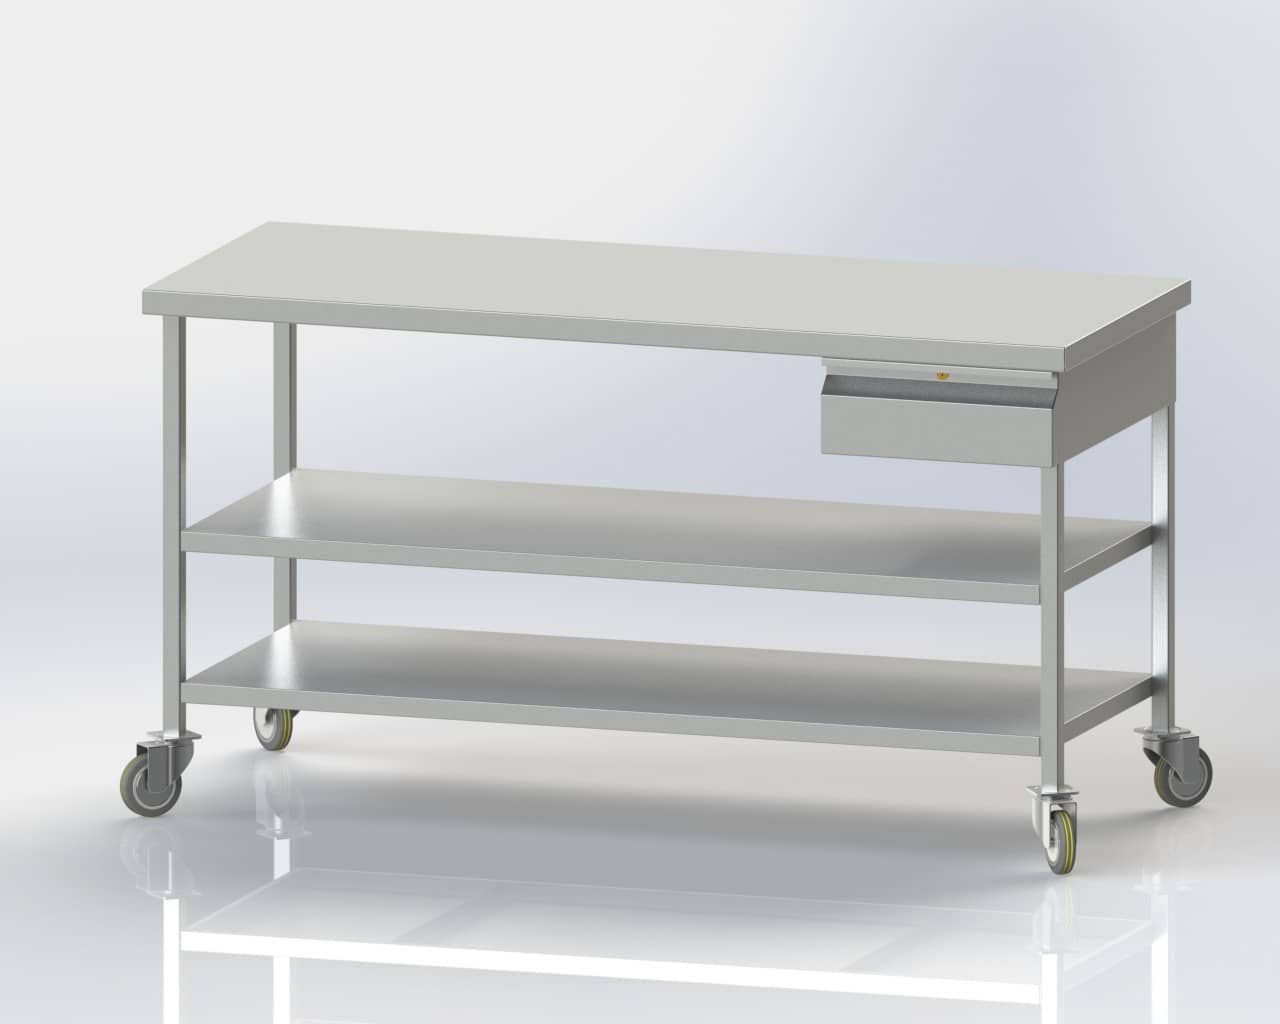 Mobile Table with Lower and Intermediate Shelves and Single Drawer